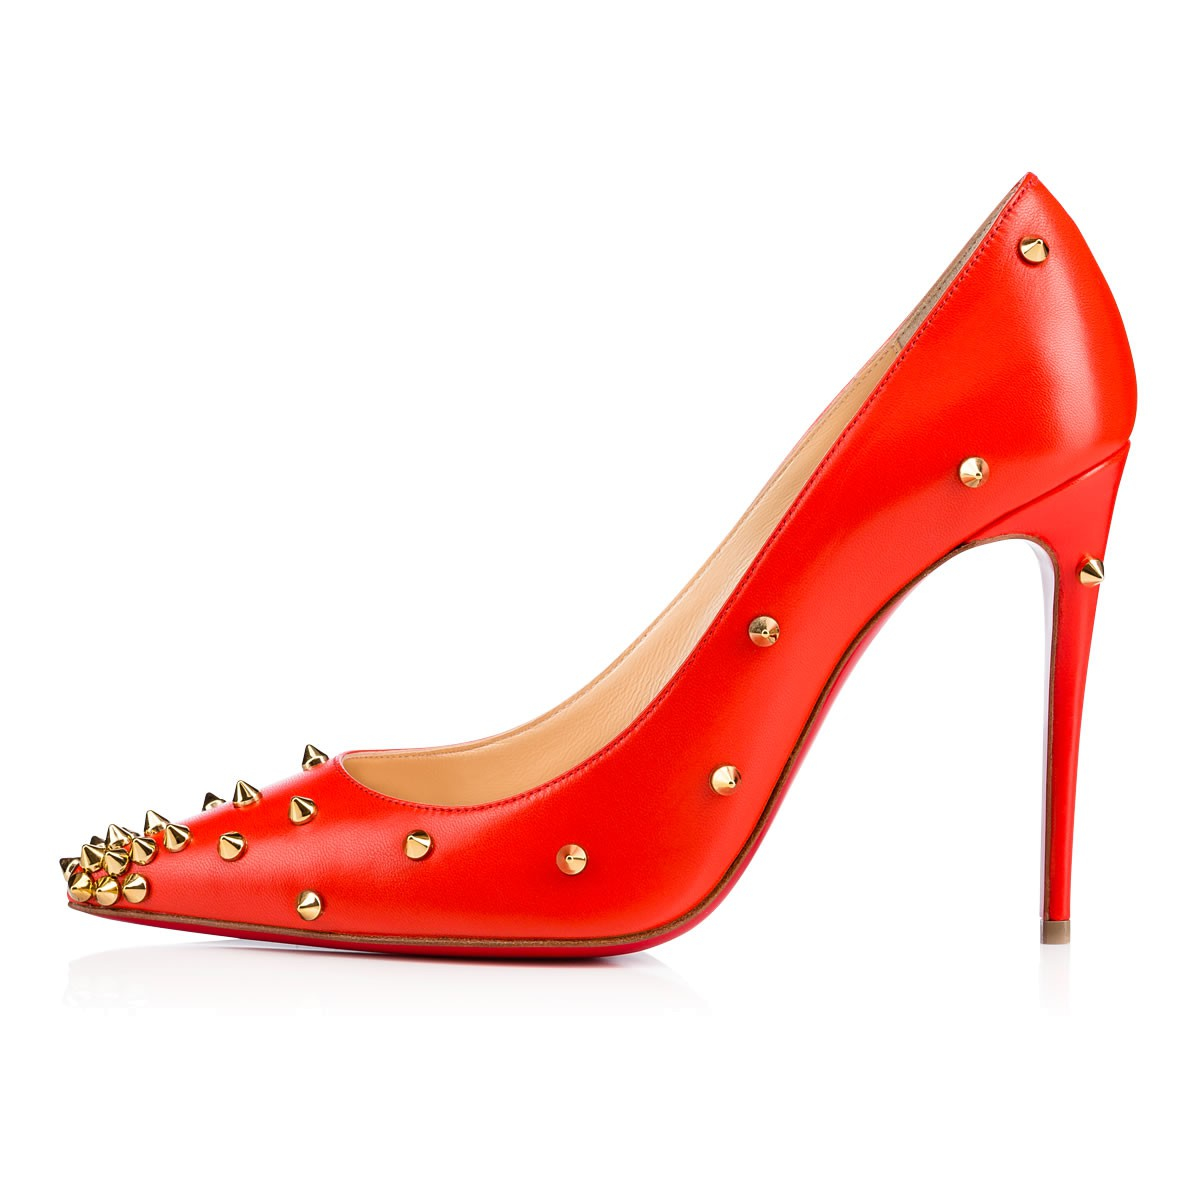 spiked mens shoes - Christian louboutin Degraspike Studded Leather Pumps in Red | Lyst